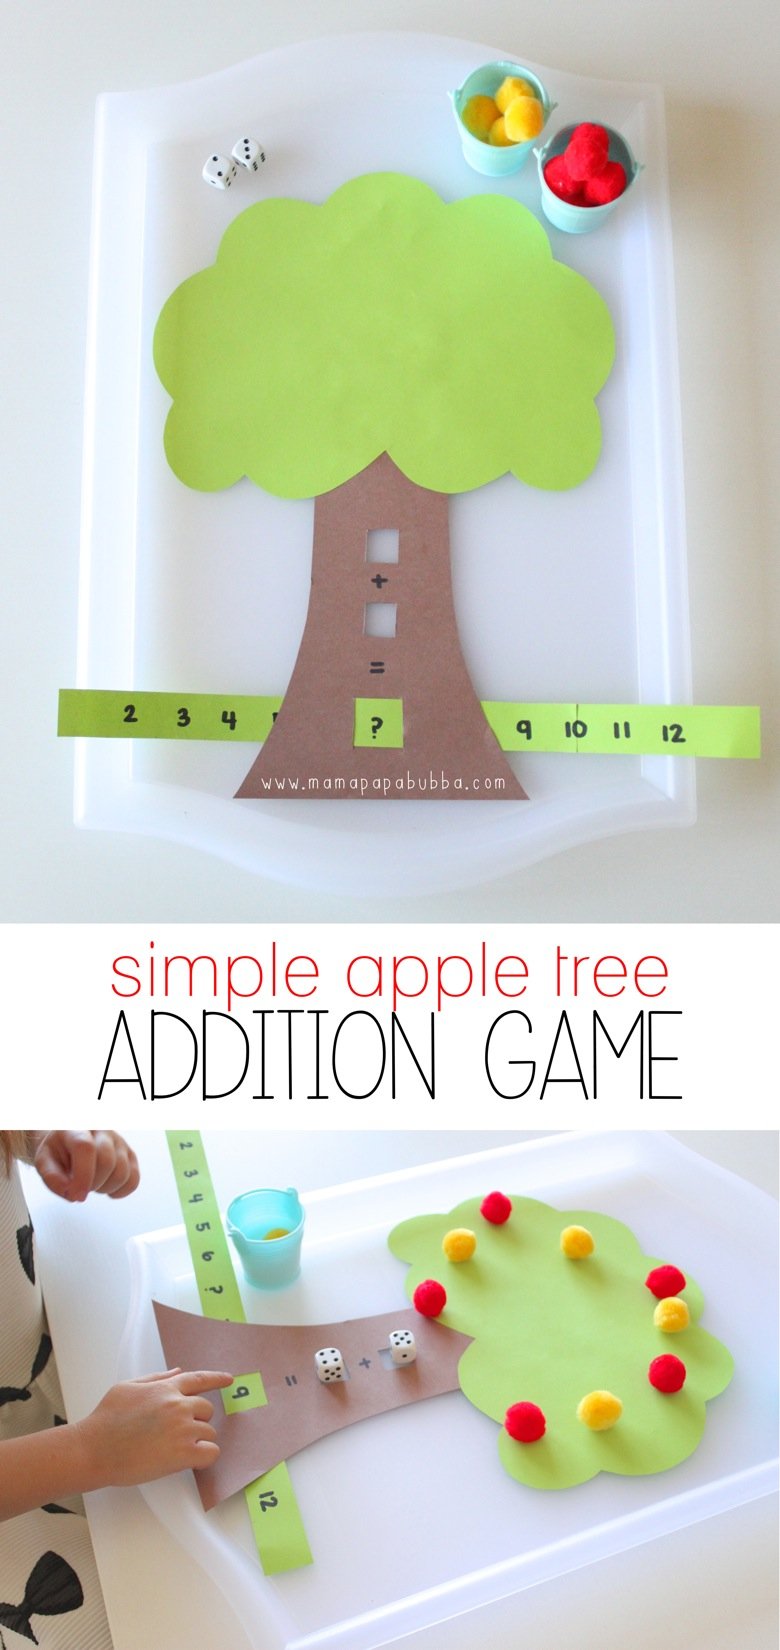 DIY Math Games Ideas to Teach Your Kids in an Easy and Fun Way